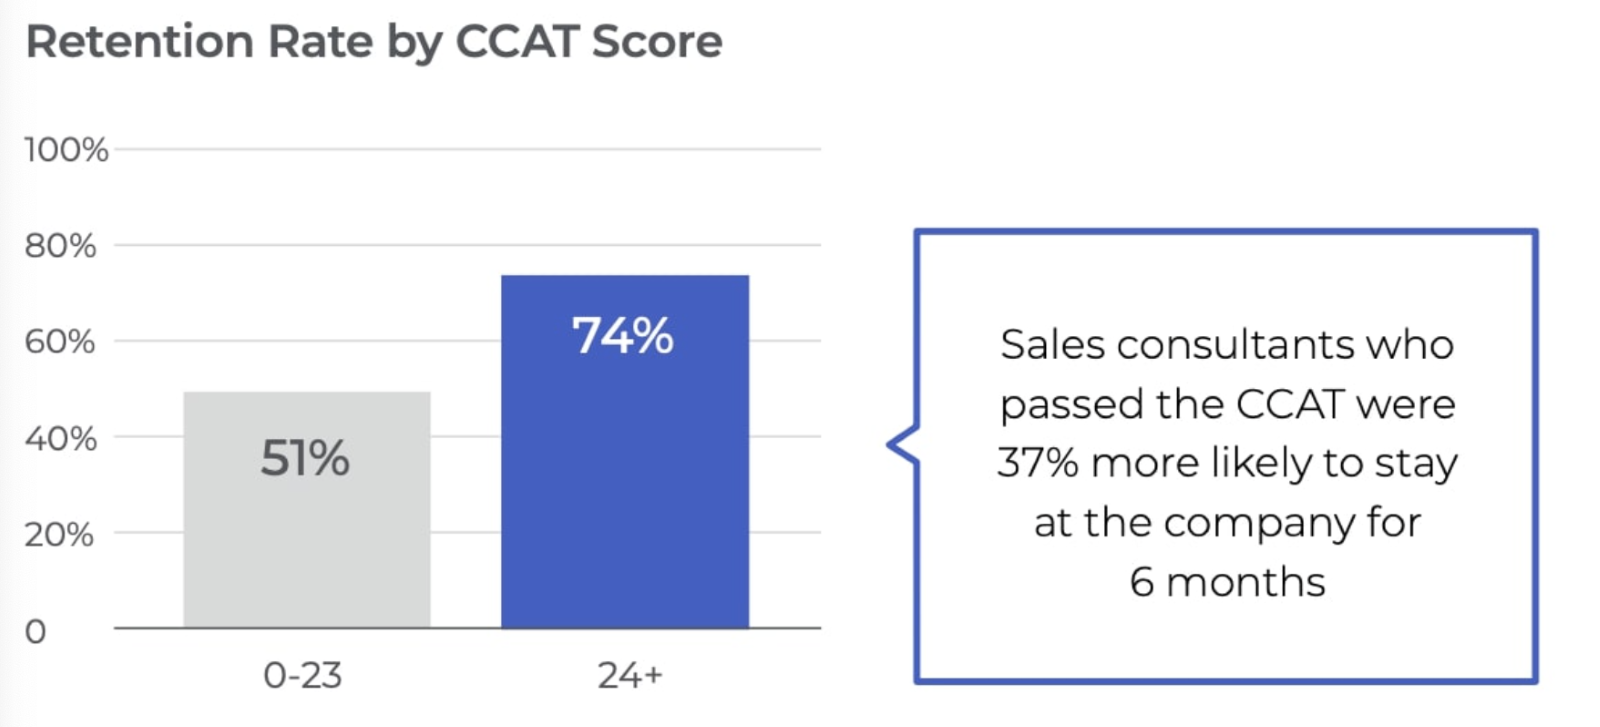 Call center sees drastic improvement in retention rate when they started using the CCAT in their hiring process